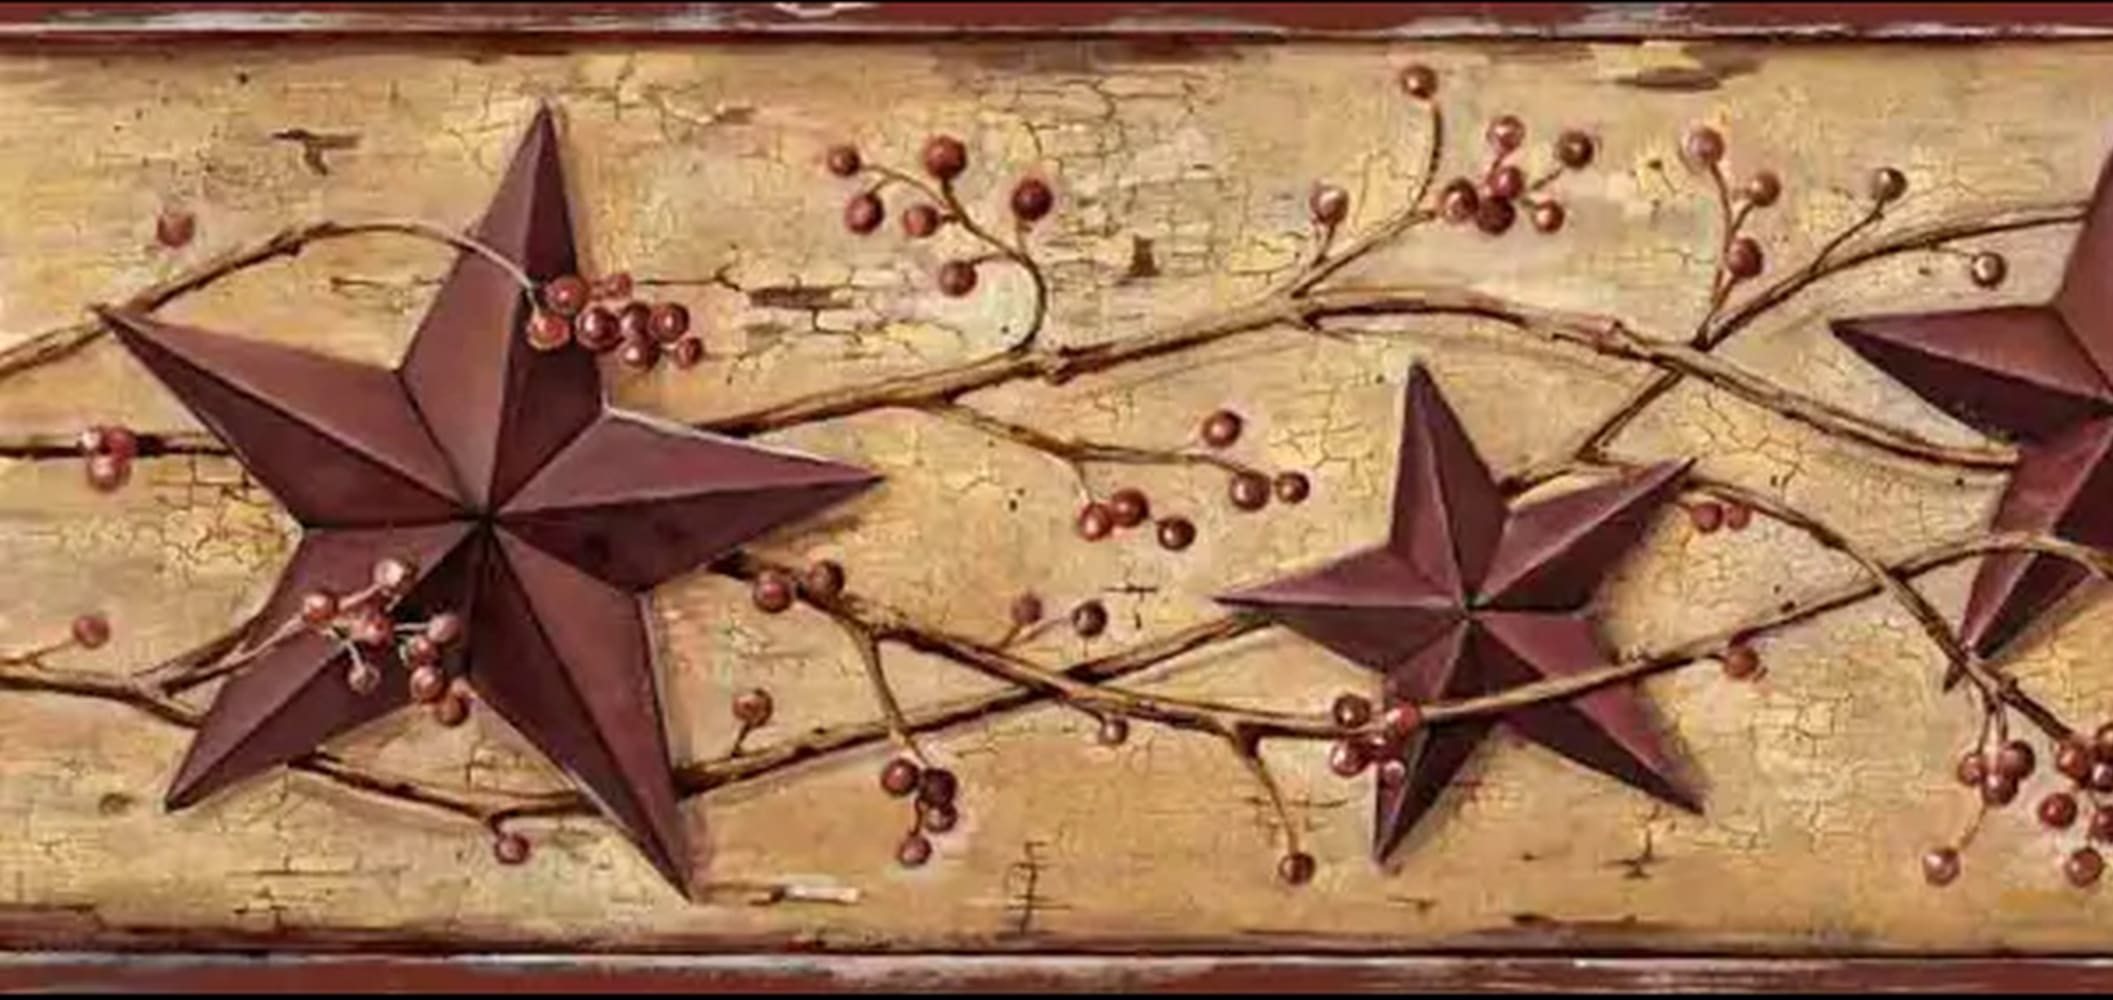 Self Adhesive Wallpaper Border - Patriotic Beige, Brown, Maroon Red Tin  Star, Berries on Vine Wall Border Retro Design, 15 ft x  in ( x  ) - Dundee Deco